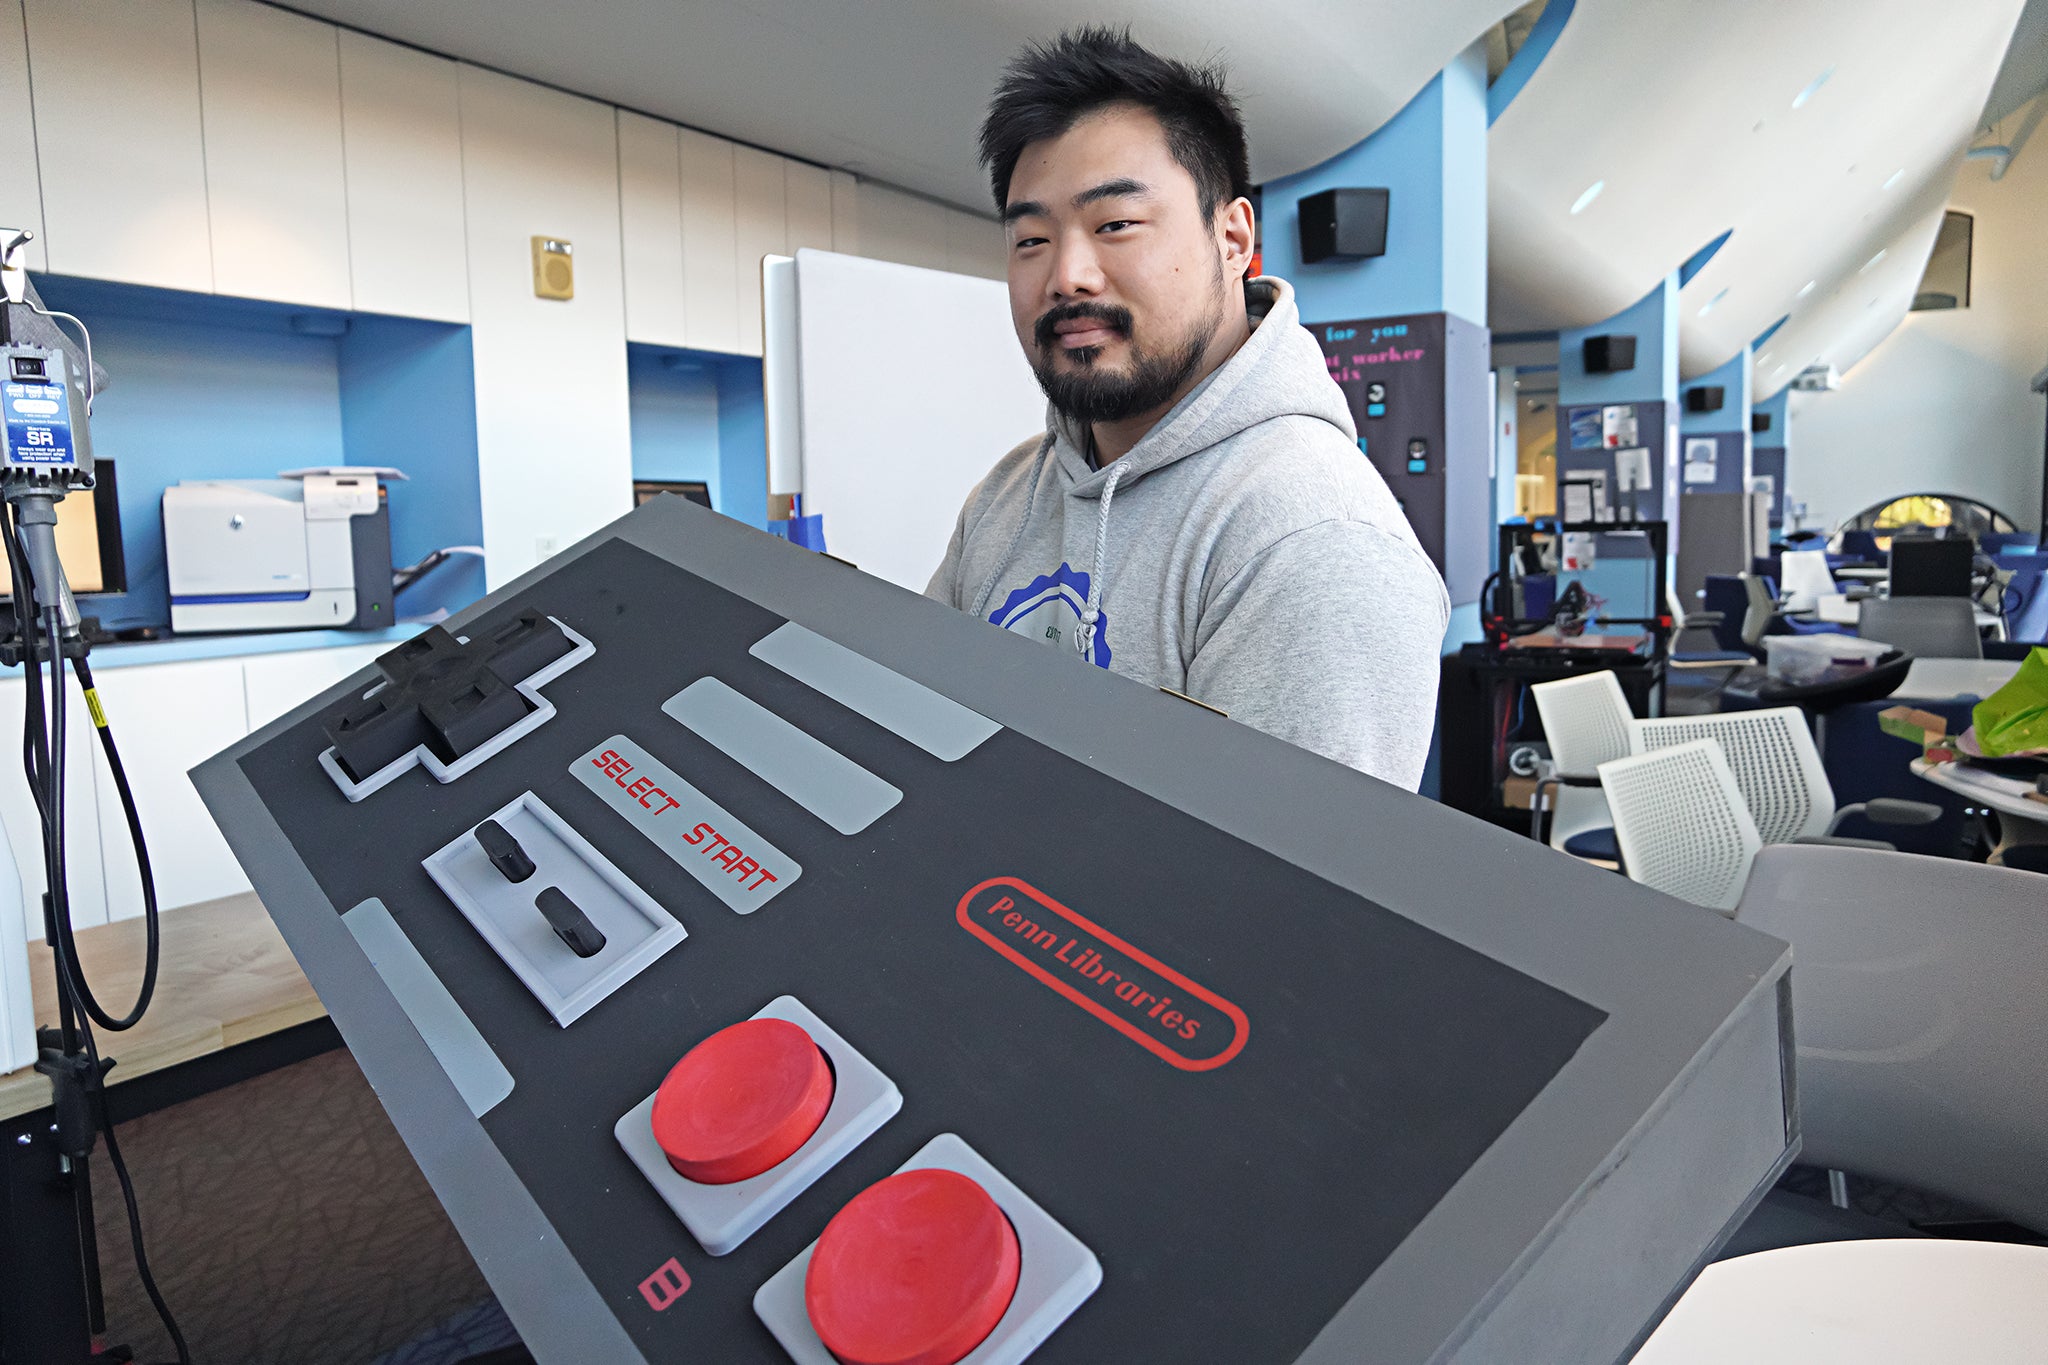 A person standing in the Education Commons makerspace holds a humorously larger-than-life model of a game controller.